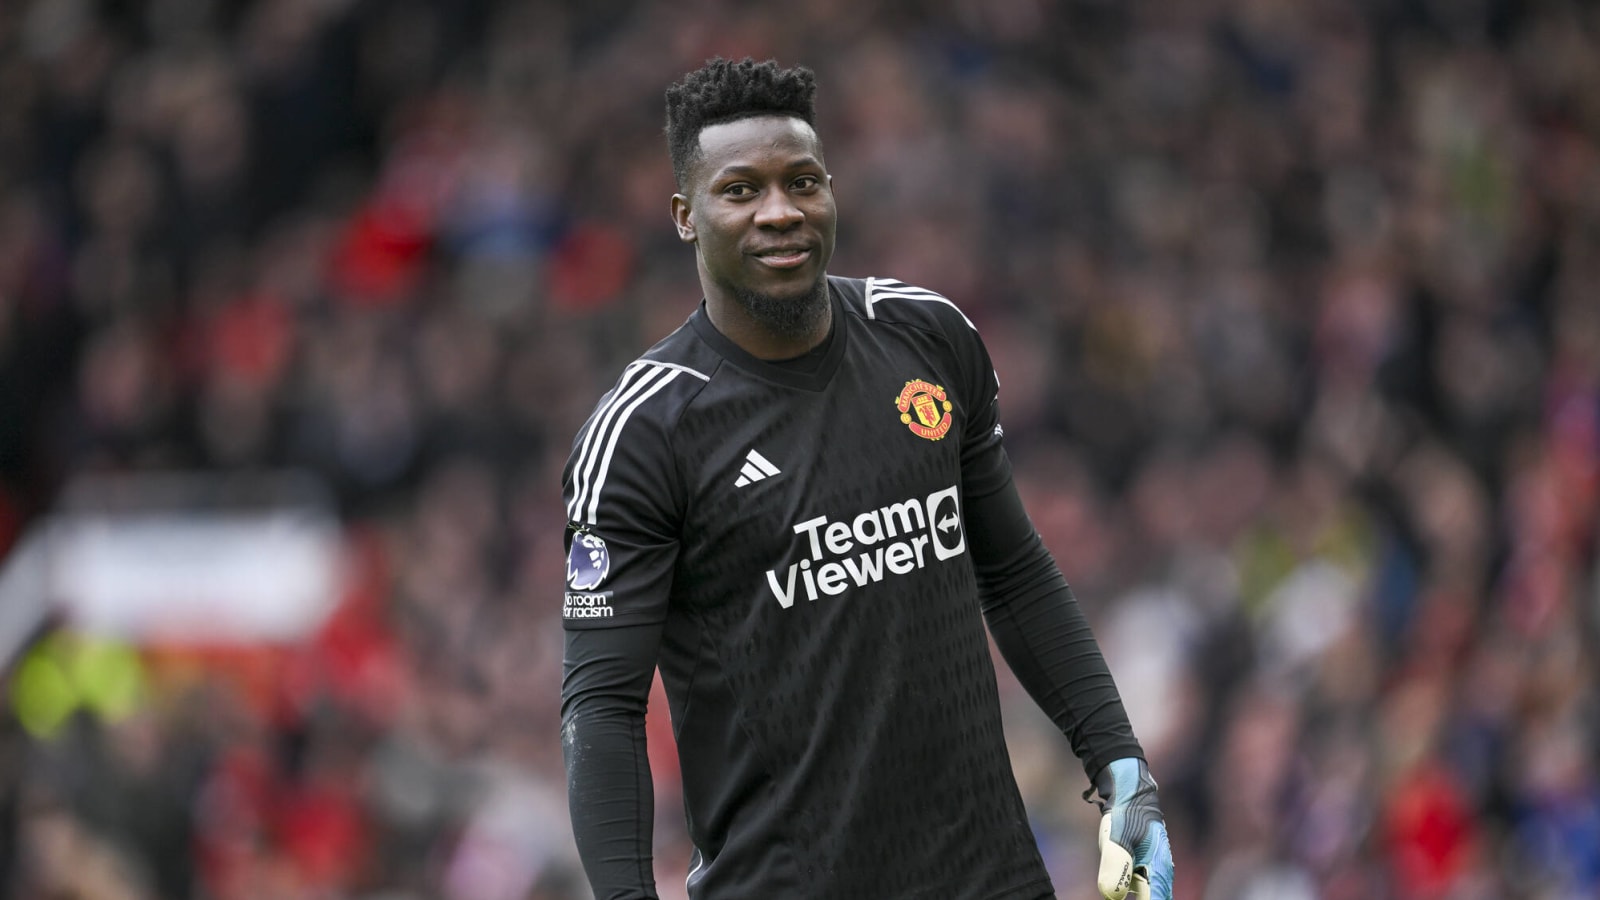 Andre Onana returning to San Siro for the first time since Manchester United transfer